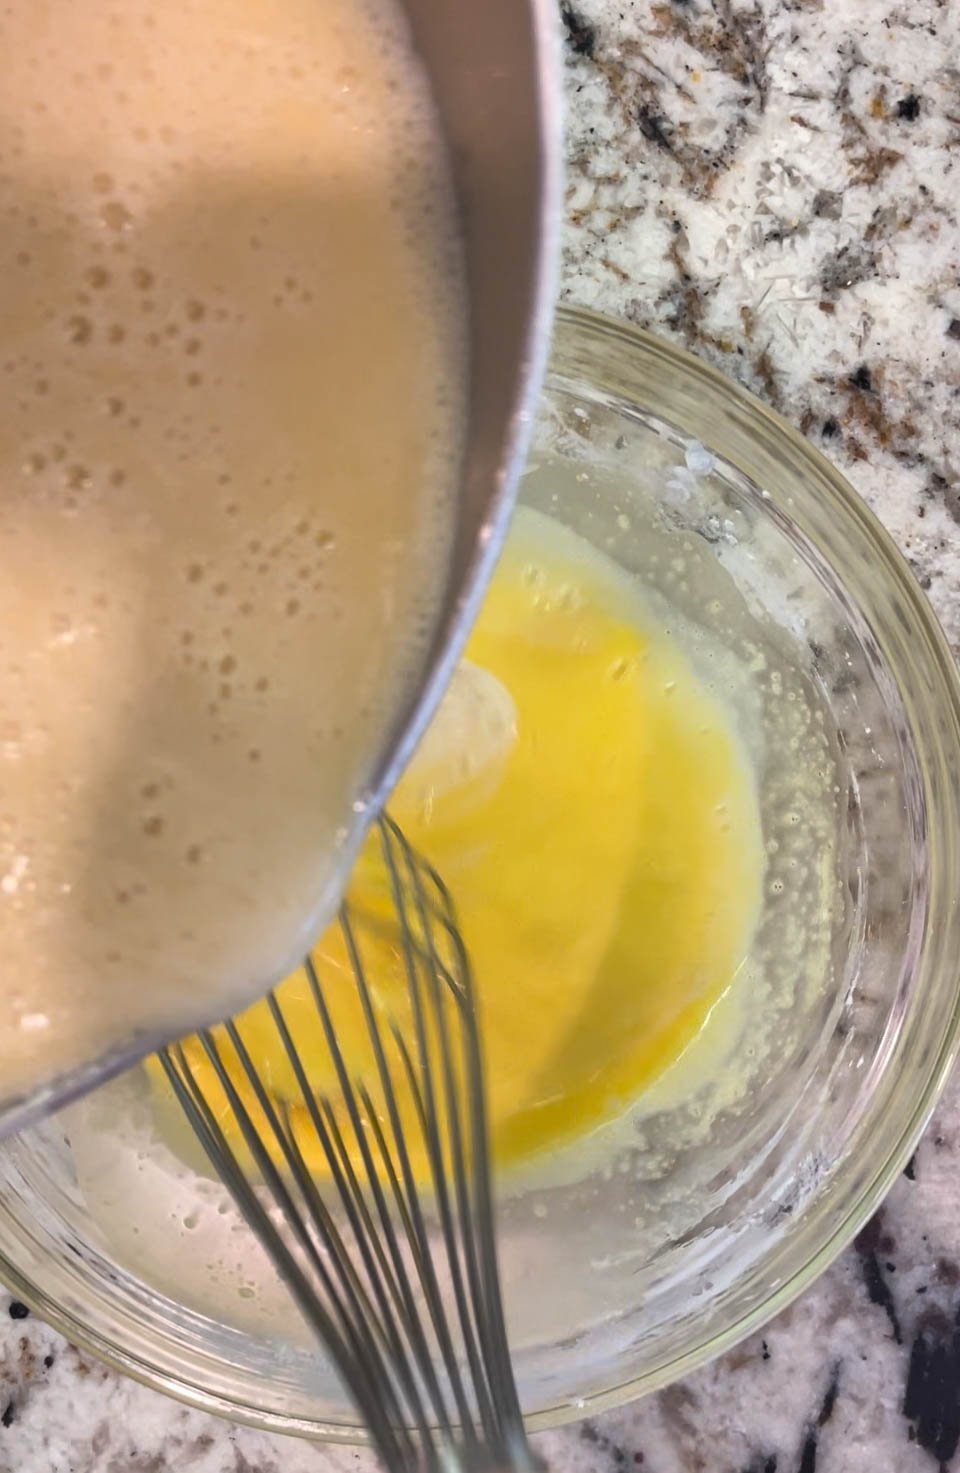 Add half the milk mixture into the eggs, whisk consistently.